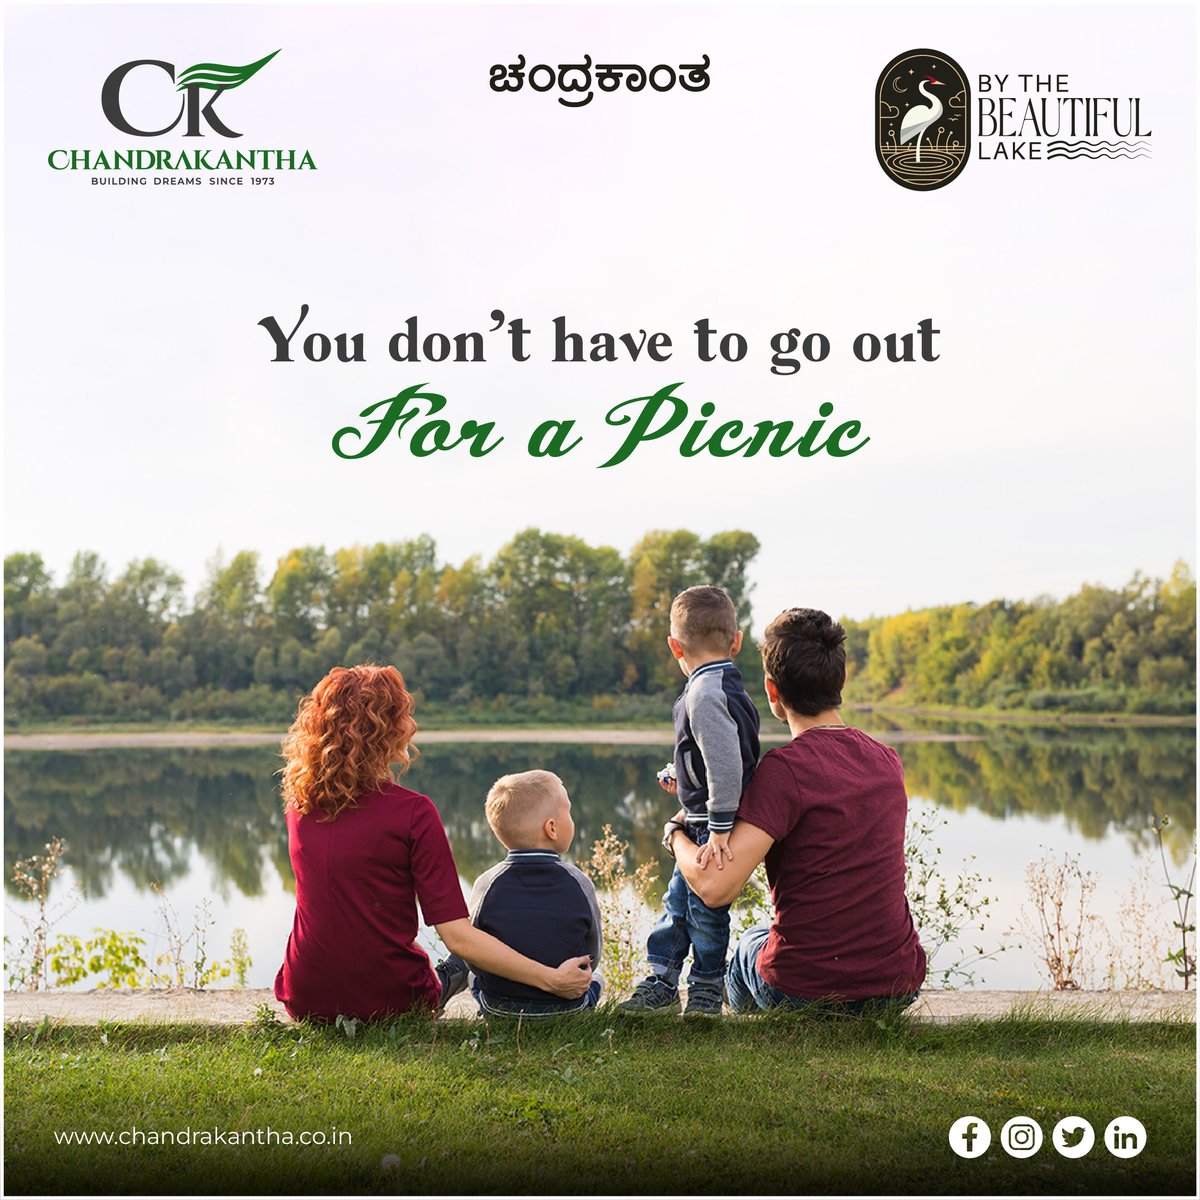 Stay cozy indoors and create your own picnic magic! Grab a blanket, some snacks, and enjoy the comfort of home.
#IndoorPicnic #chandrakanthadevelopers #2bhkvillas #3bhkvillas #lakefrontvillas #lakeview #lakefronthouse #luxuryhomes #house #homesweethome #luxuryvillas #forsale